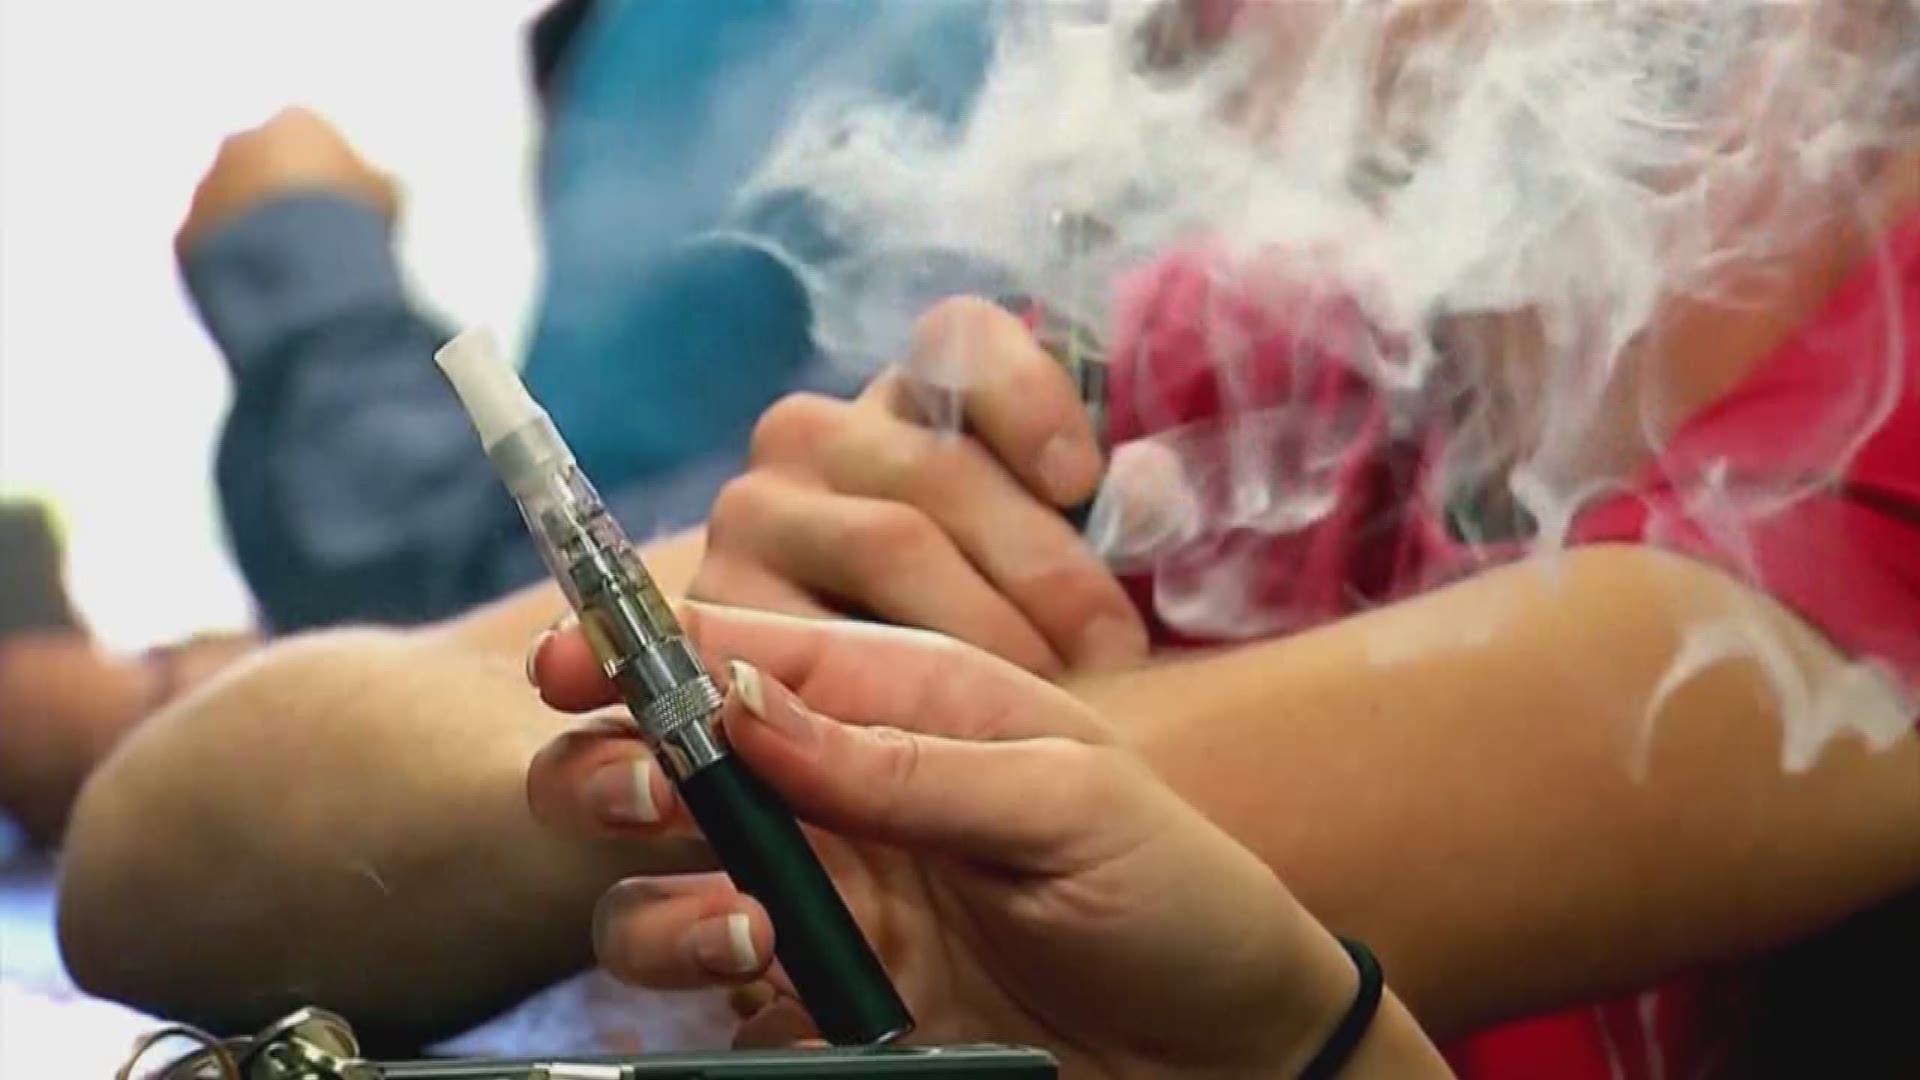 The nationwide ban on some flavored e-cigarette products went into effect Thursday, but underage teens have likely already found a way around it.